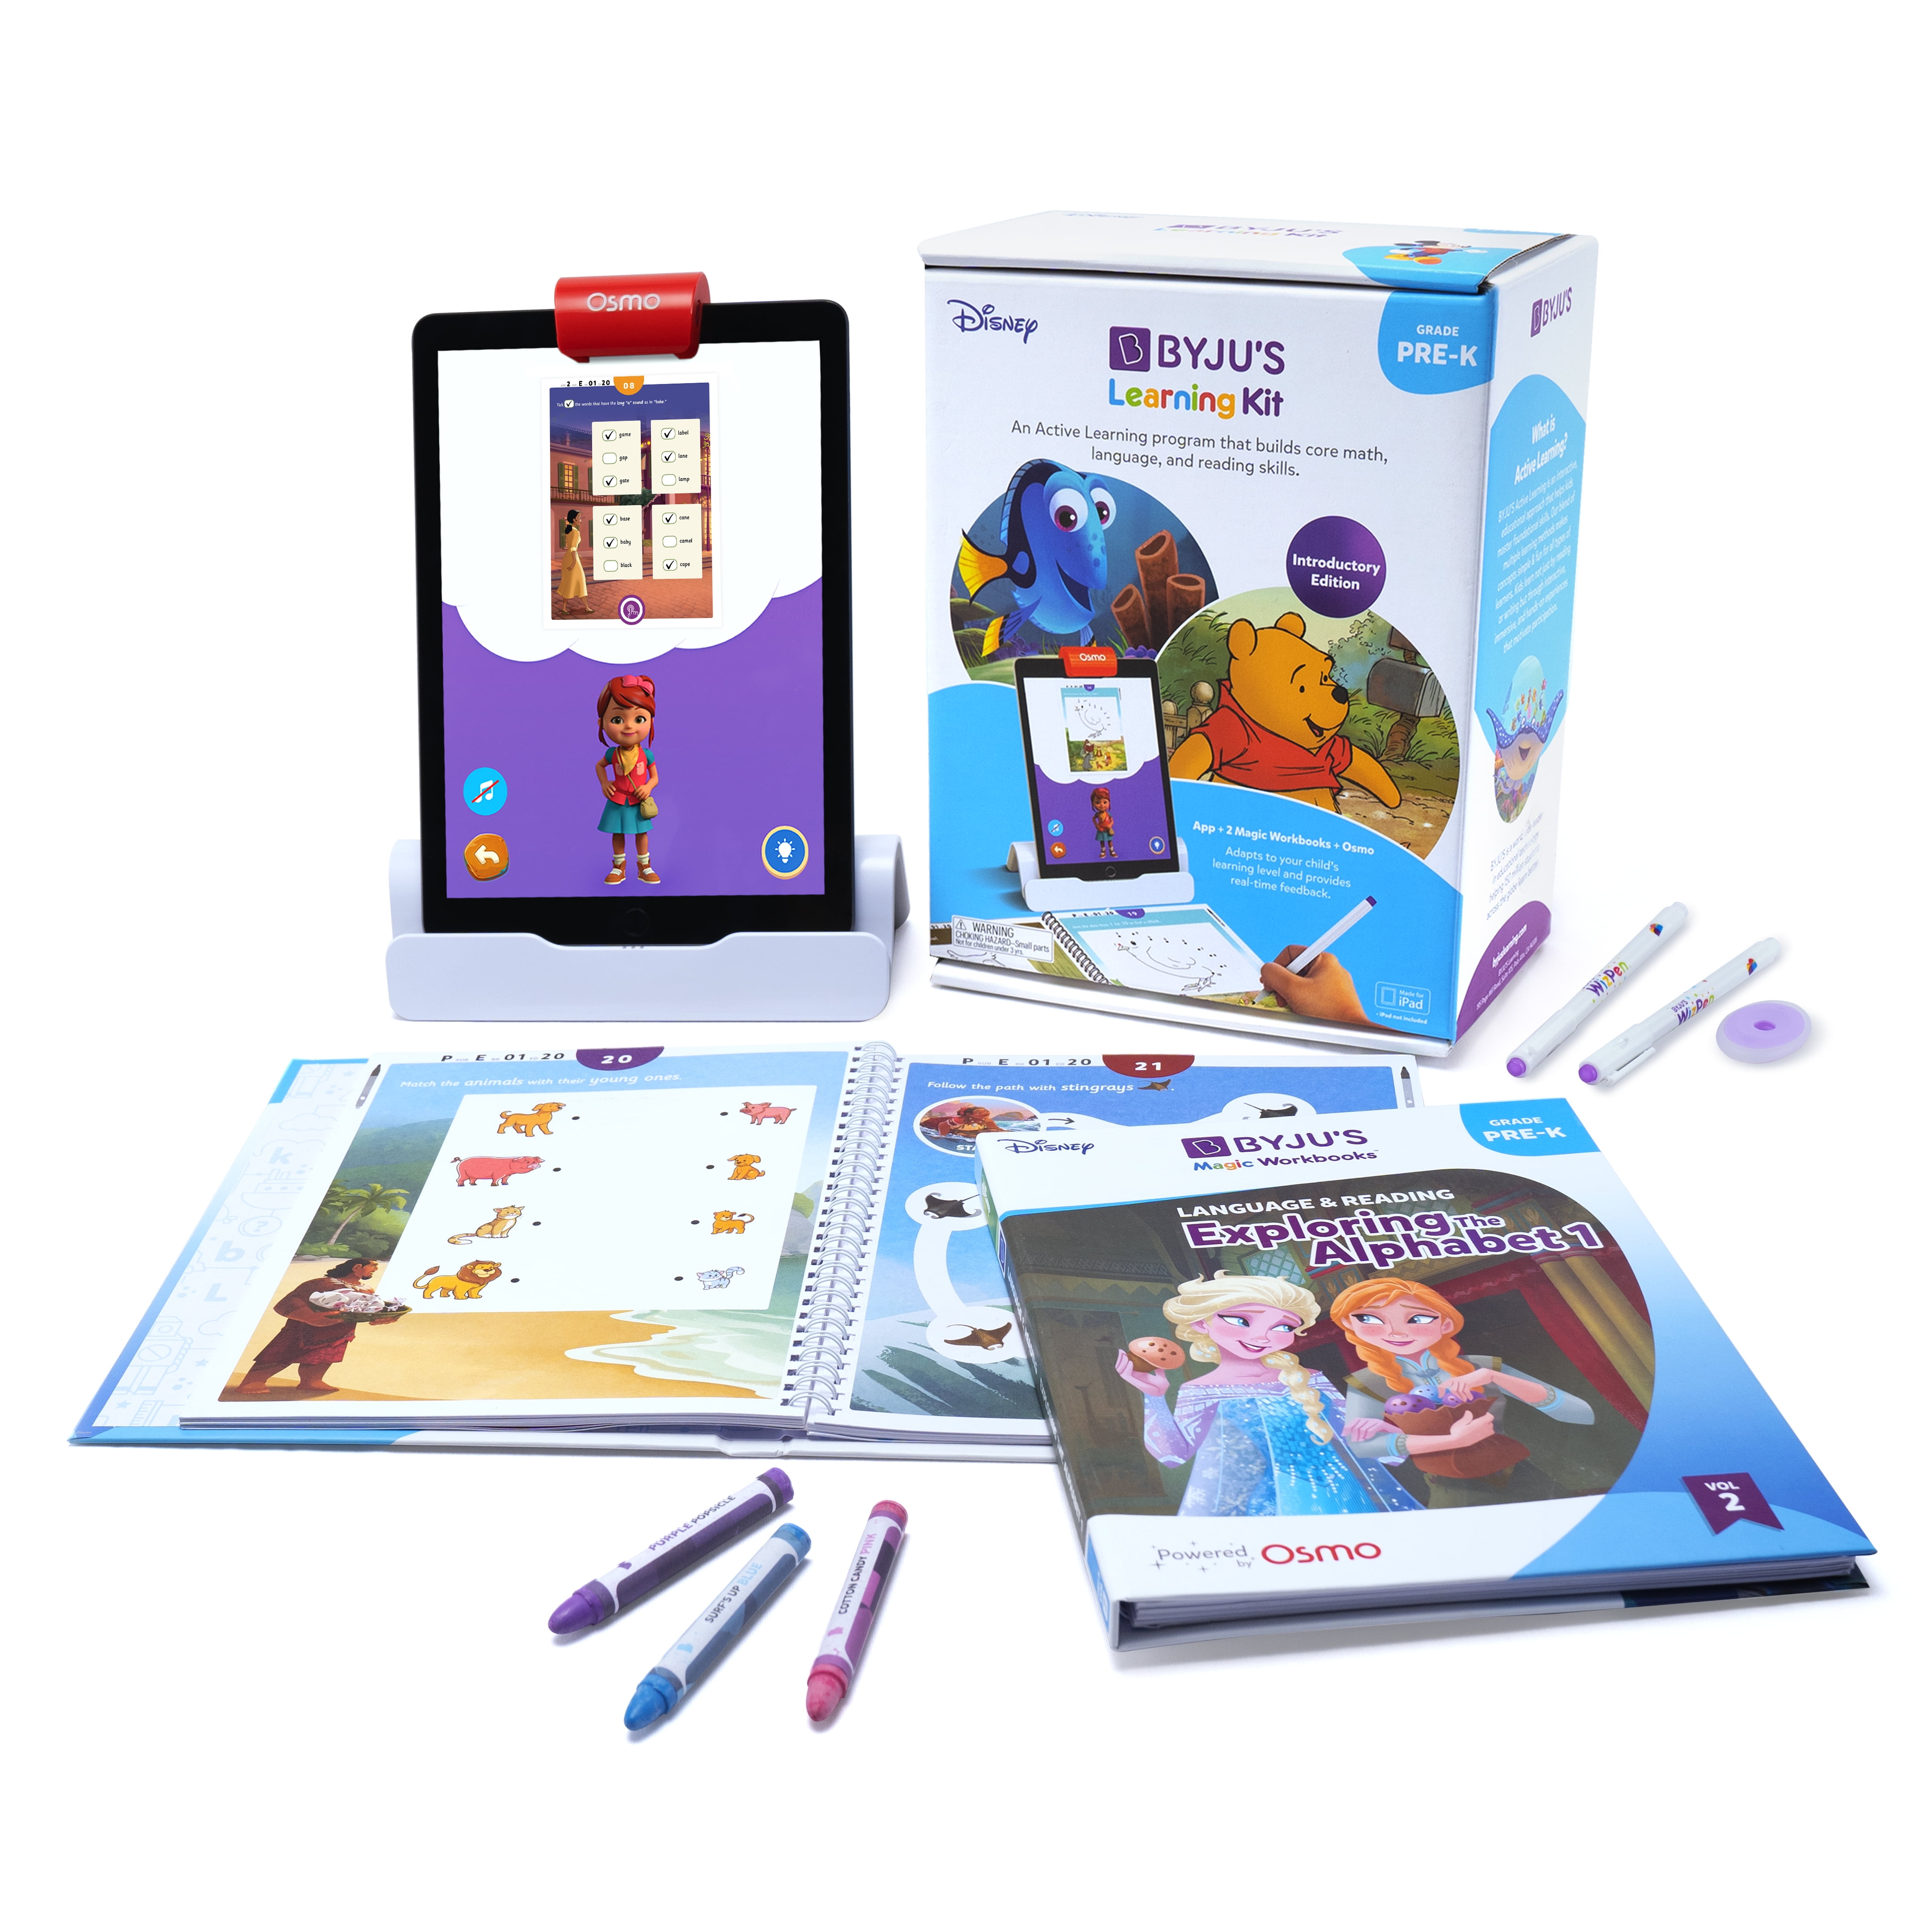 BYJUS Learning Kit: Disney, Pre K, Introductory Edition, Preschool Workbooks Age 3, 4, 5, Pre K Learning Toys, Preschool Learning Games, Math Games, Puzzles, Phonics, Sight Words, Reading Workbooks